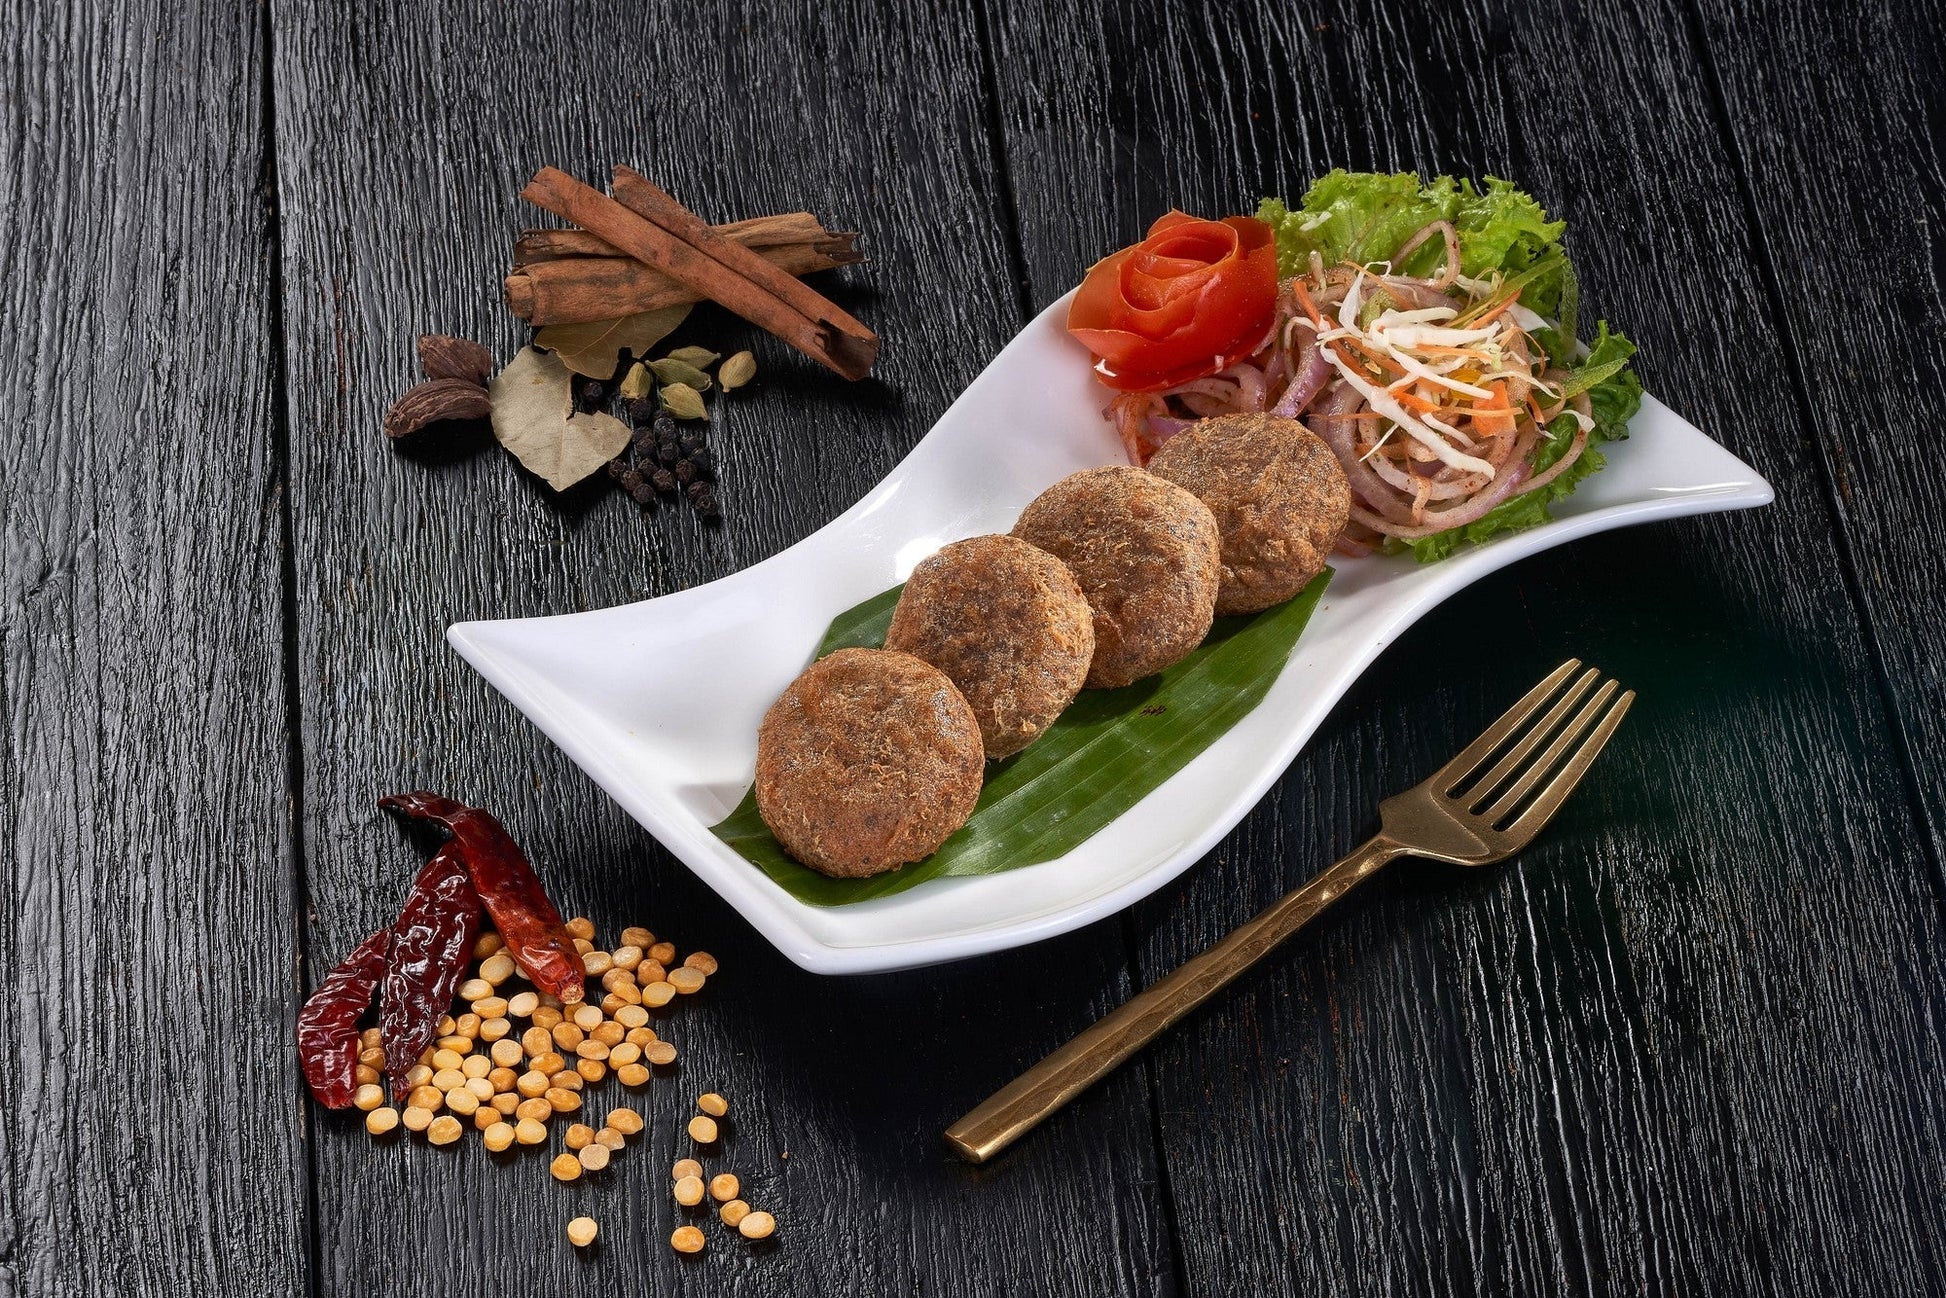 A plate of crispy Shami Kebabs, savory patties made with minced lamb and lentil